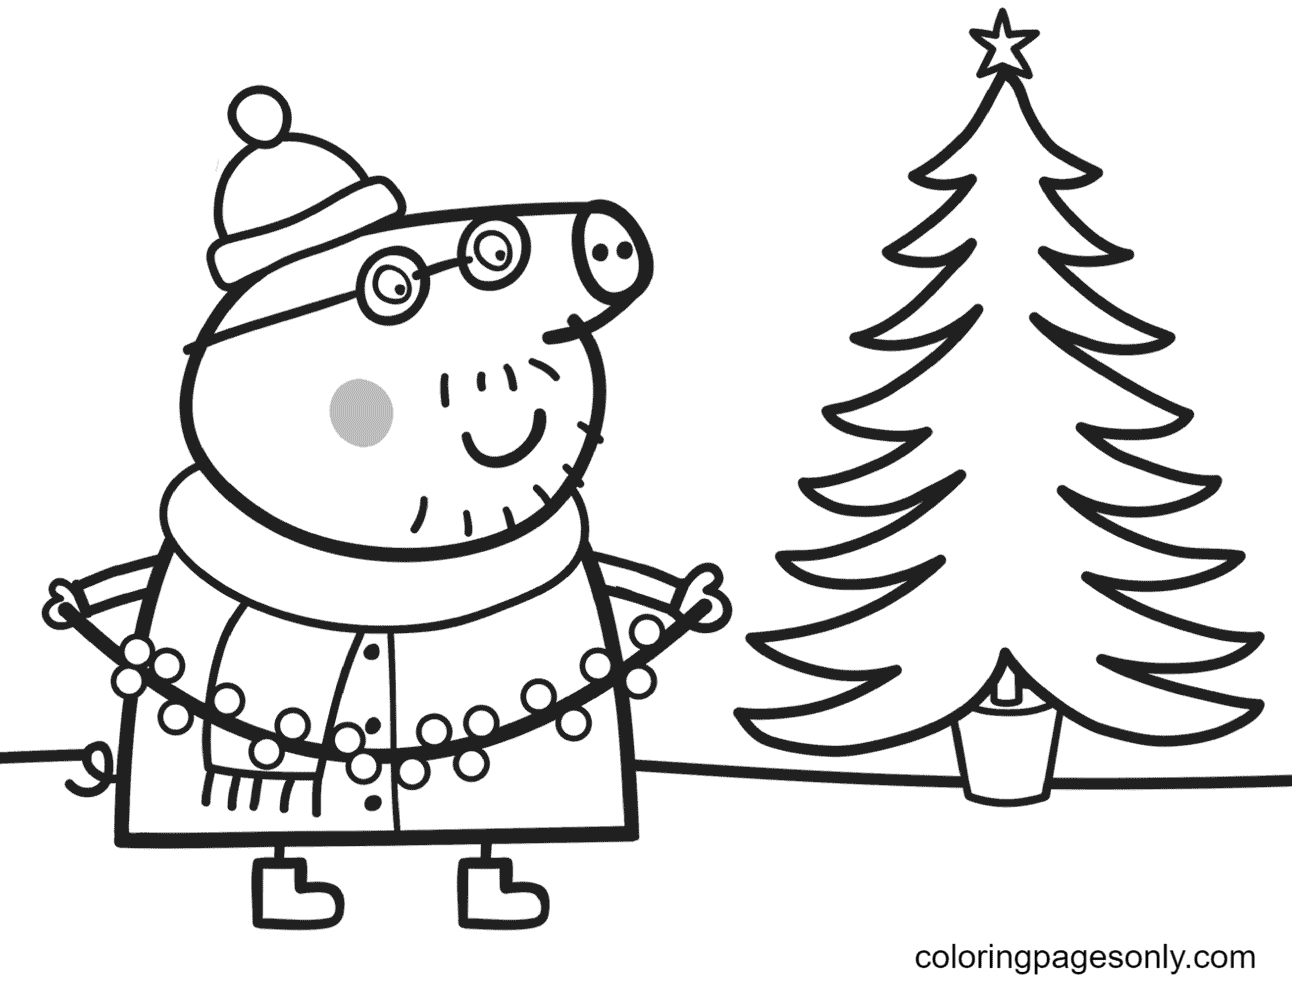 Daddy Pig Decorates Xmas Tree Coloring Pages